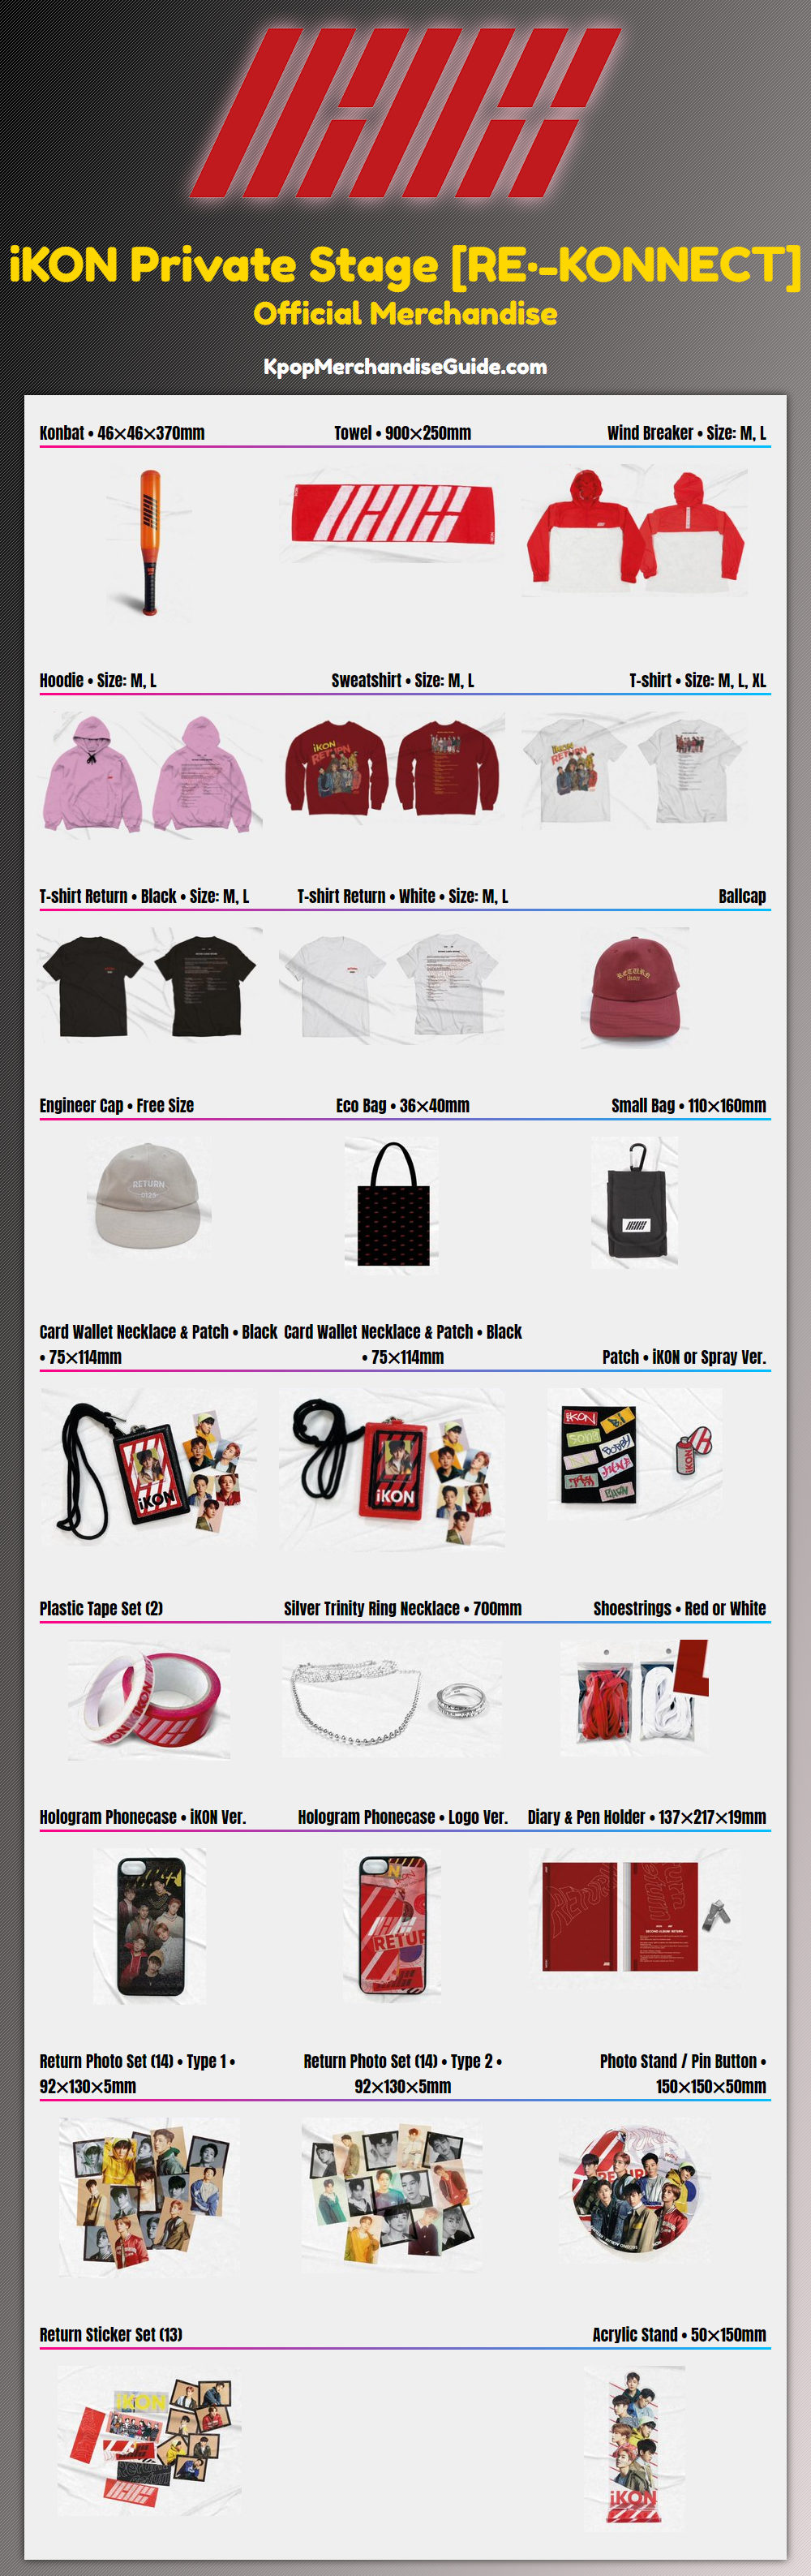 iKON Private Stage Re-Konnect Merchandise